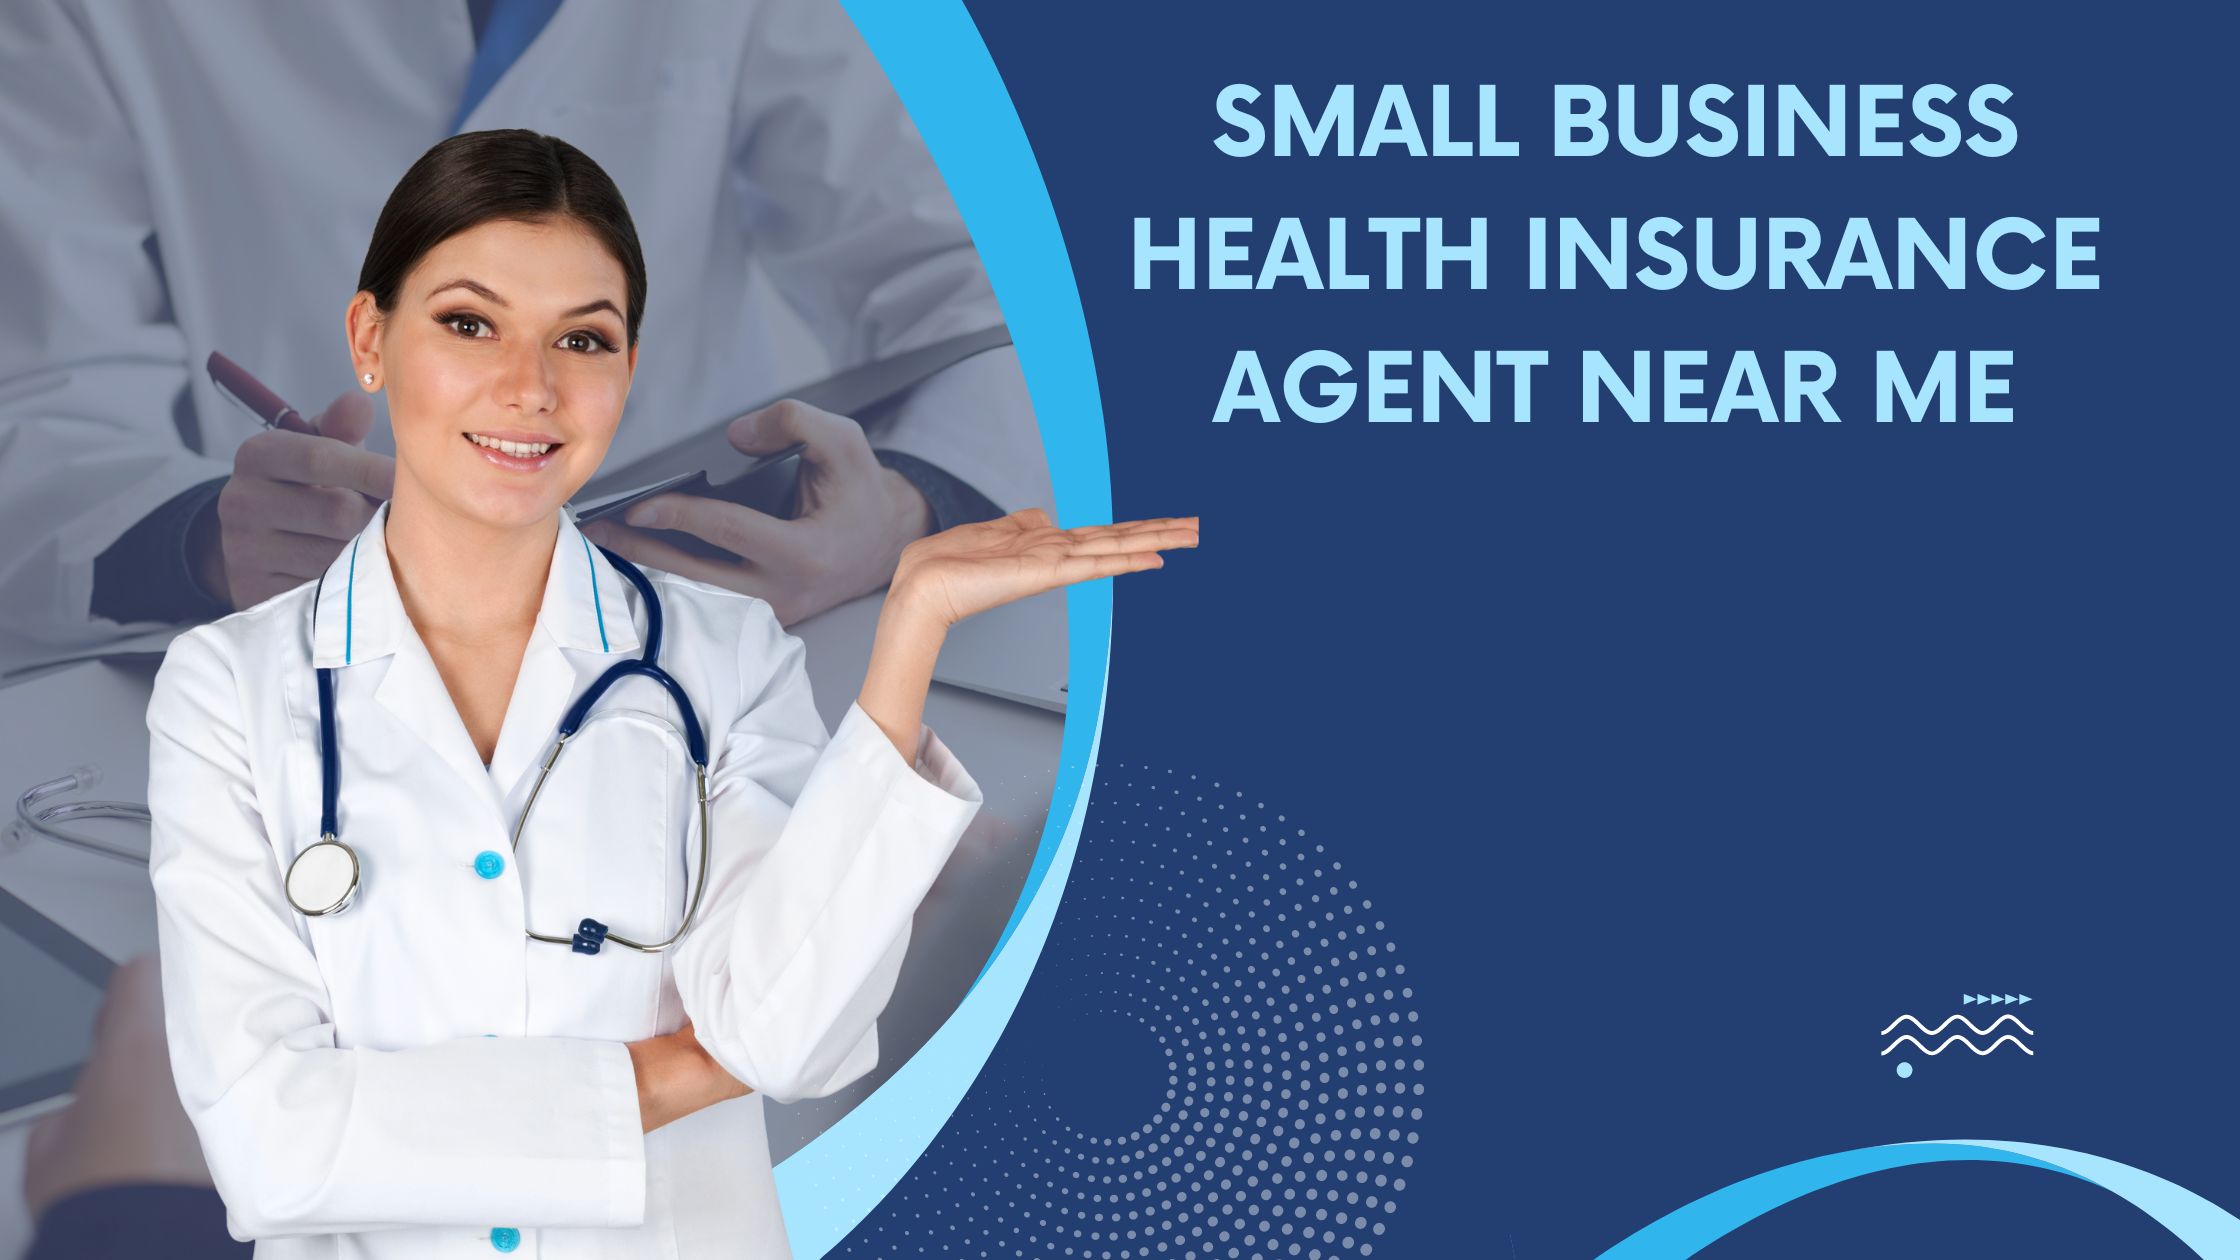 Small Business Health Insurance Agent Near Me